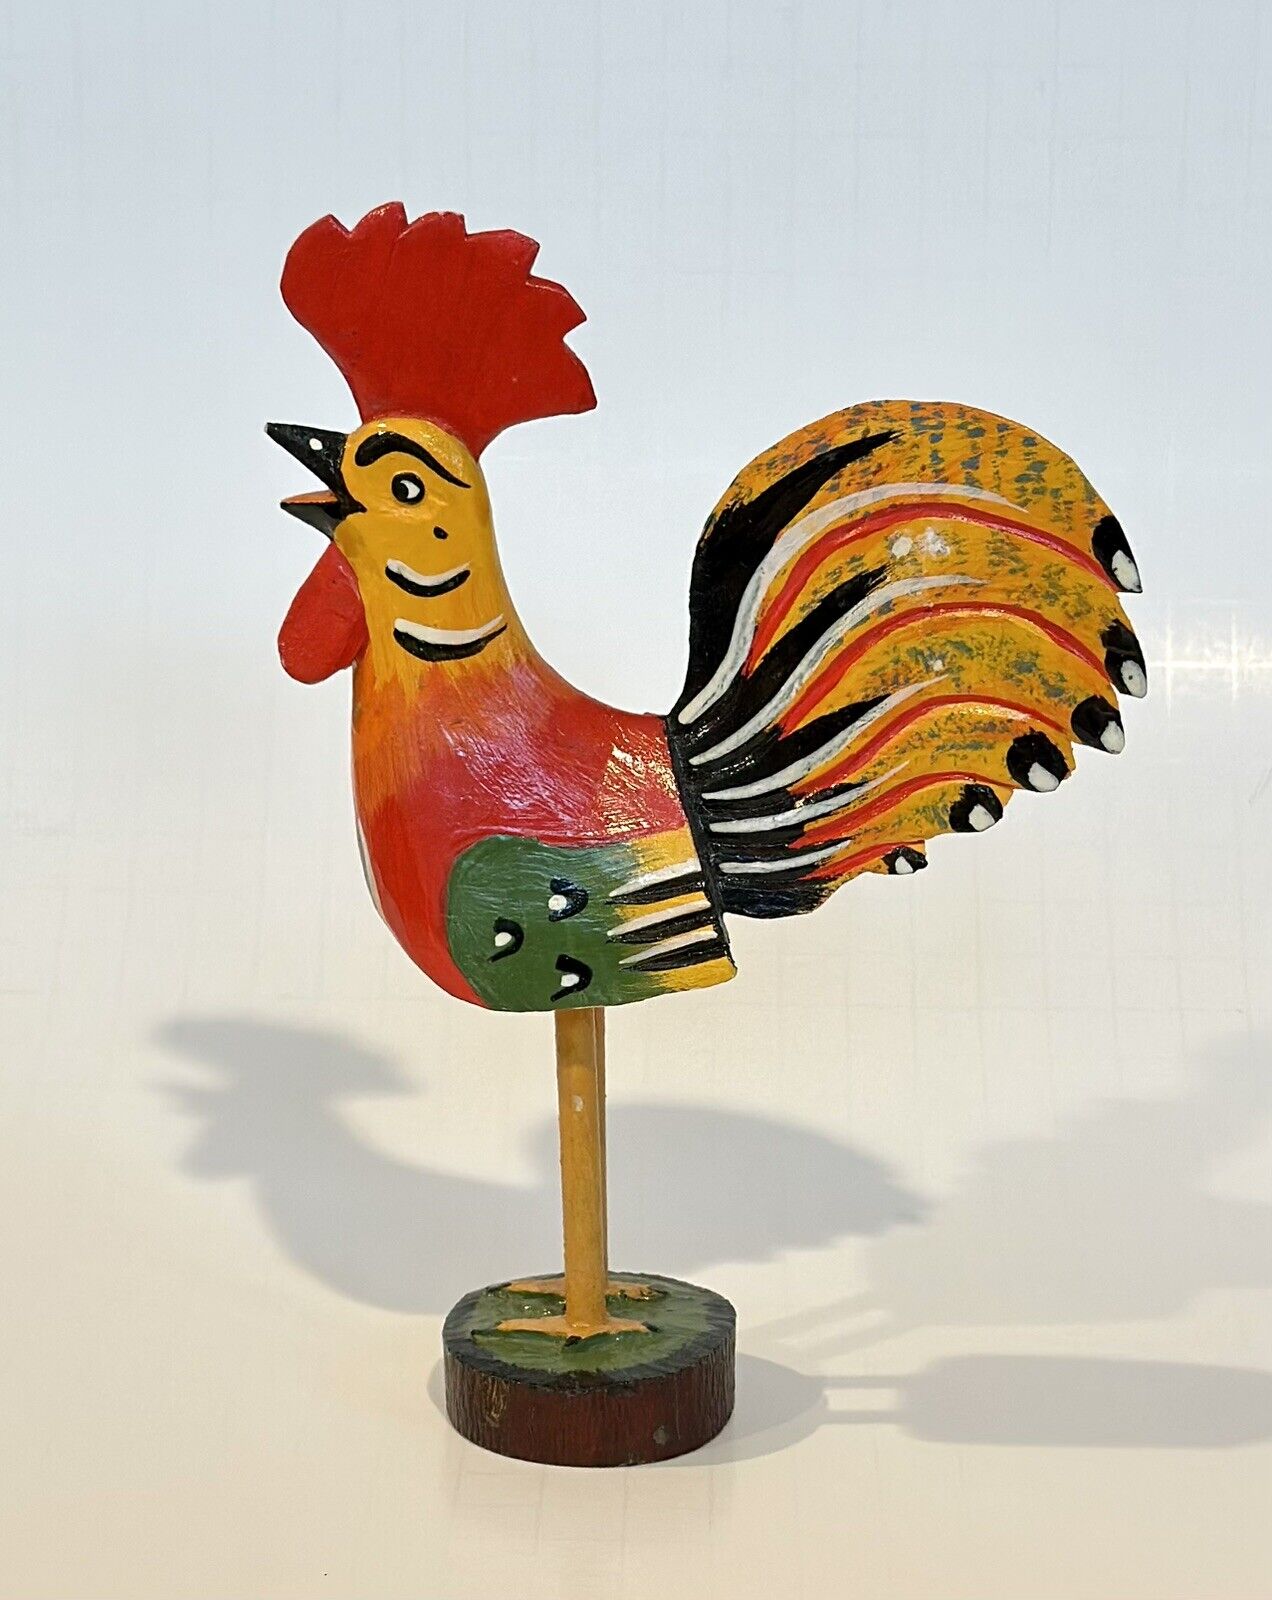 Rustic Colorful Hand-Carved Hand-Painted Wooden Folk Rooster Made In Poland 2005